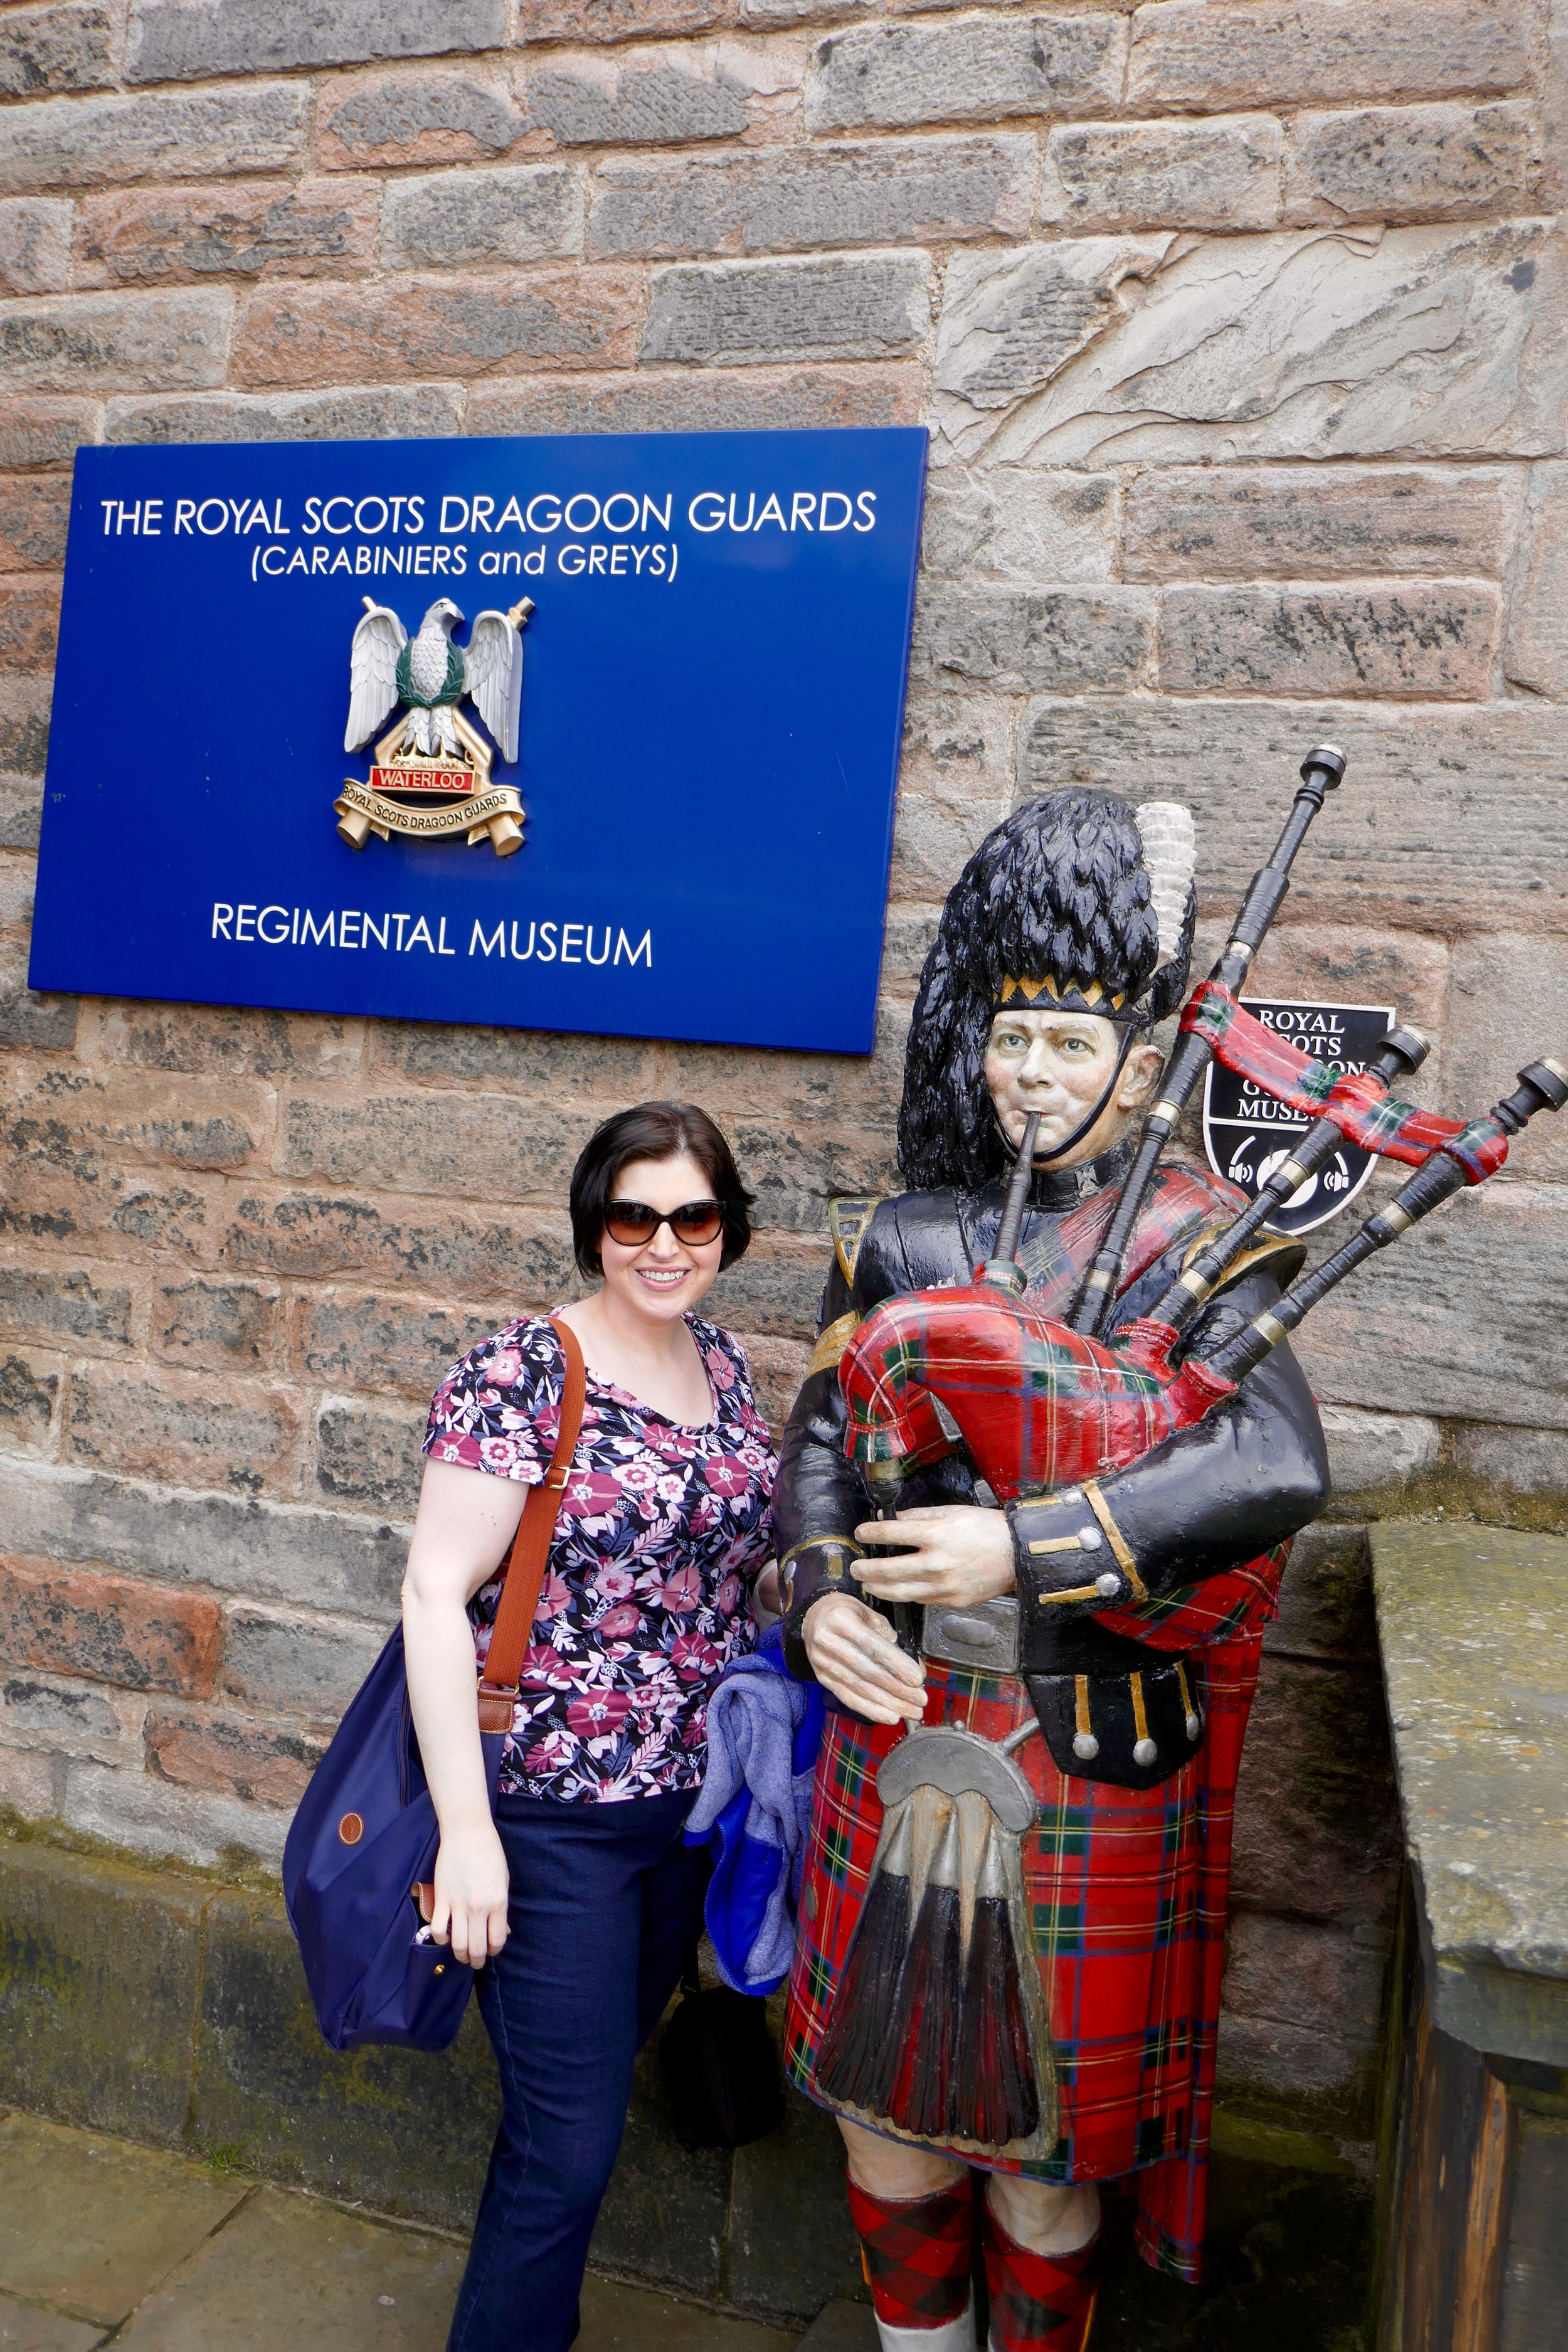 With the statue of the Scottish soldier at Edinburgh Castle